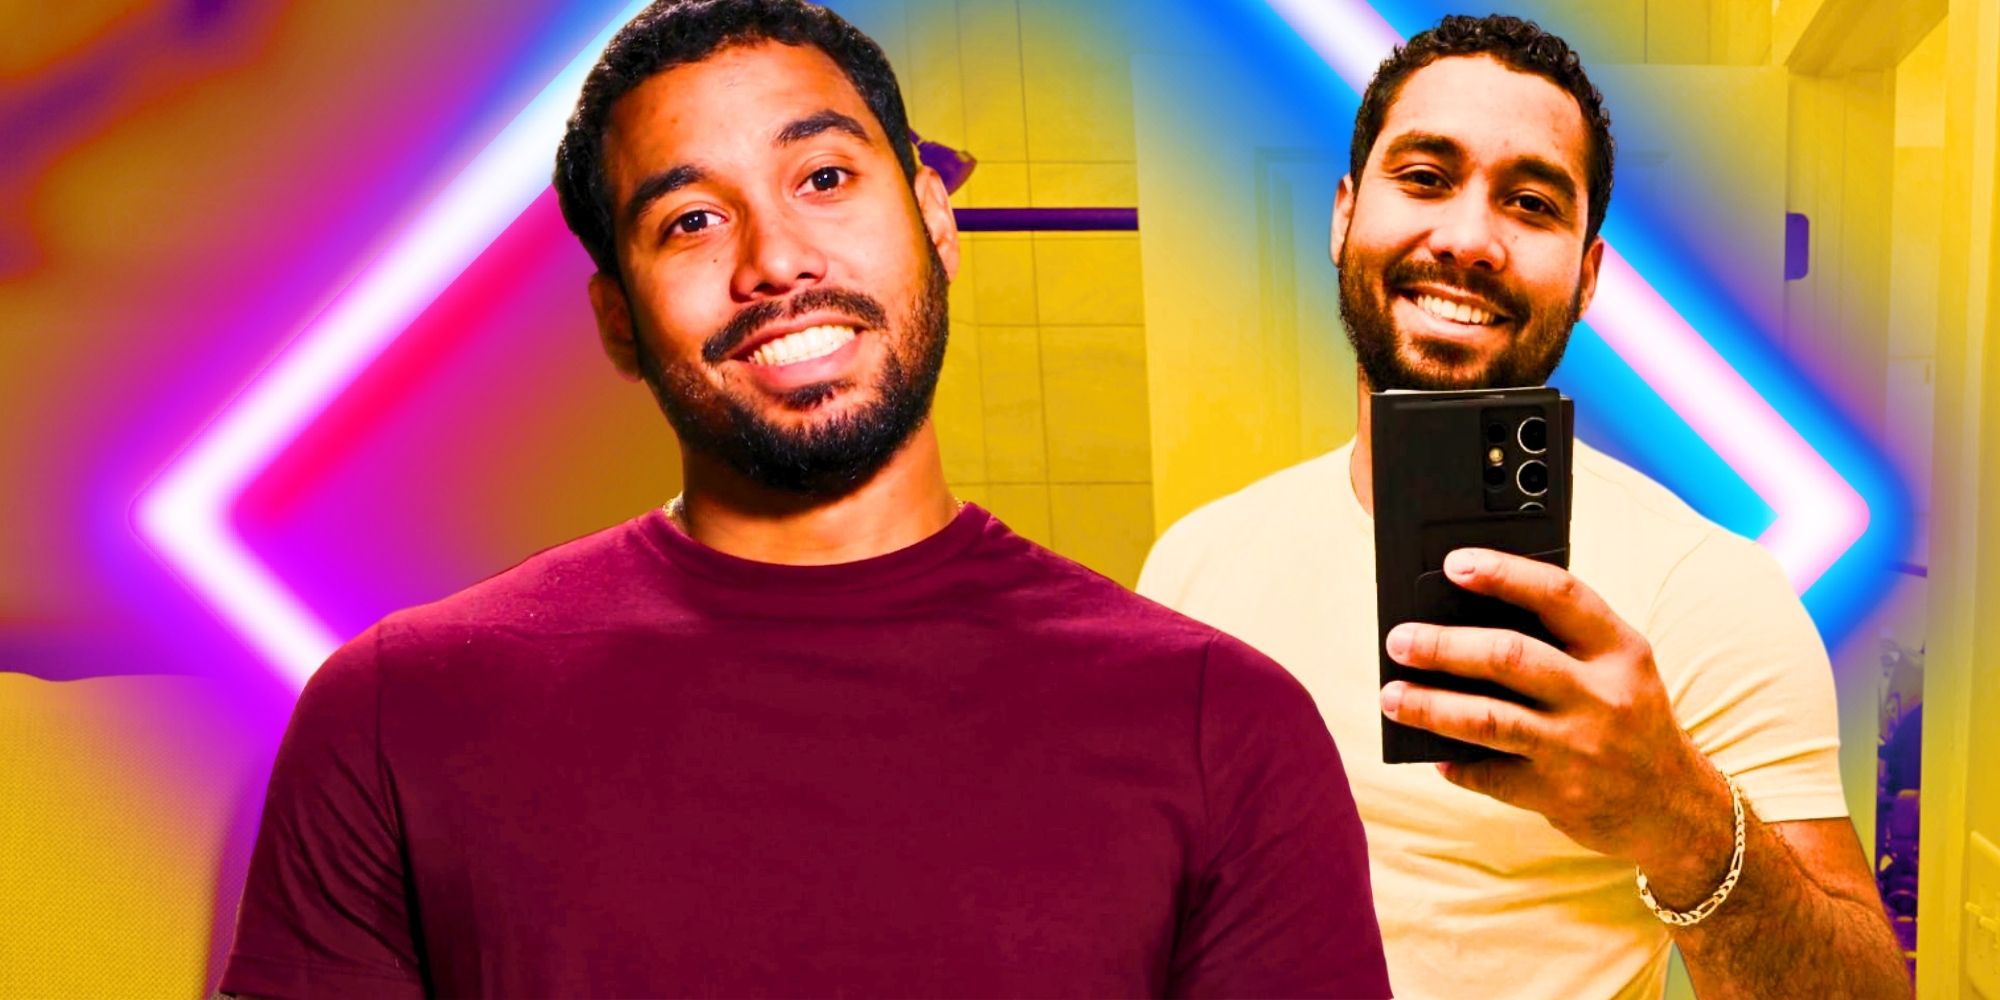 90 Day Fiancé_ Pedro Jimeno in side by side images from the show and IG